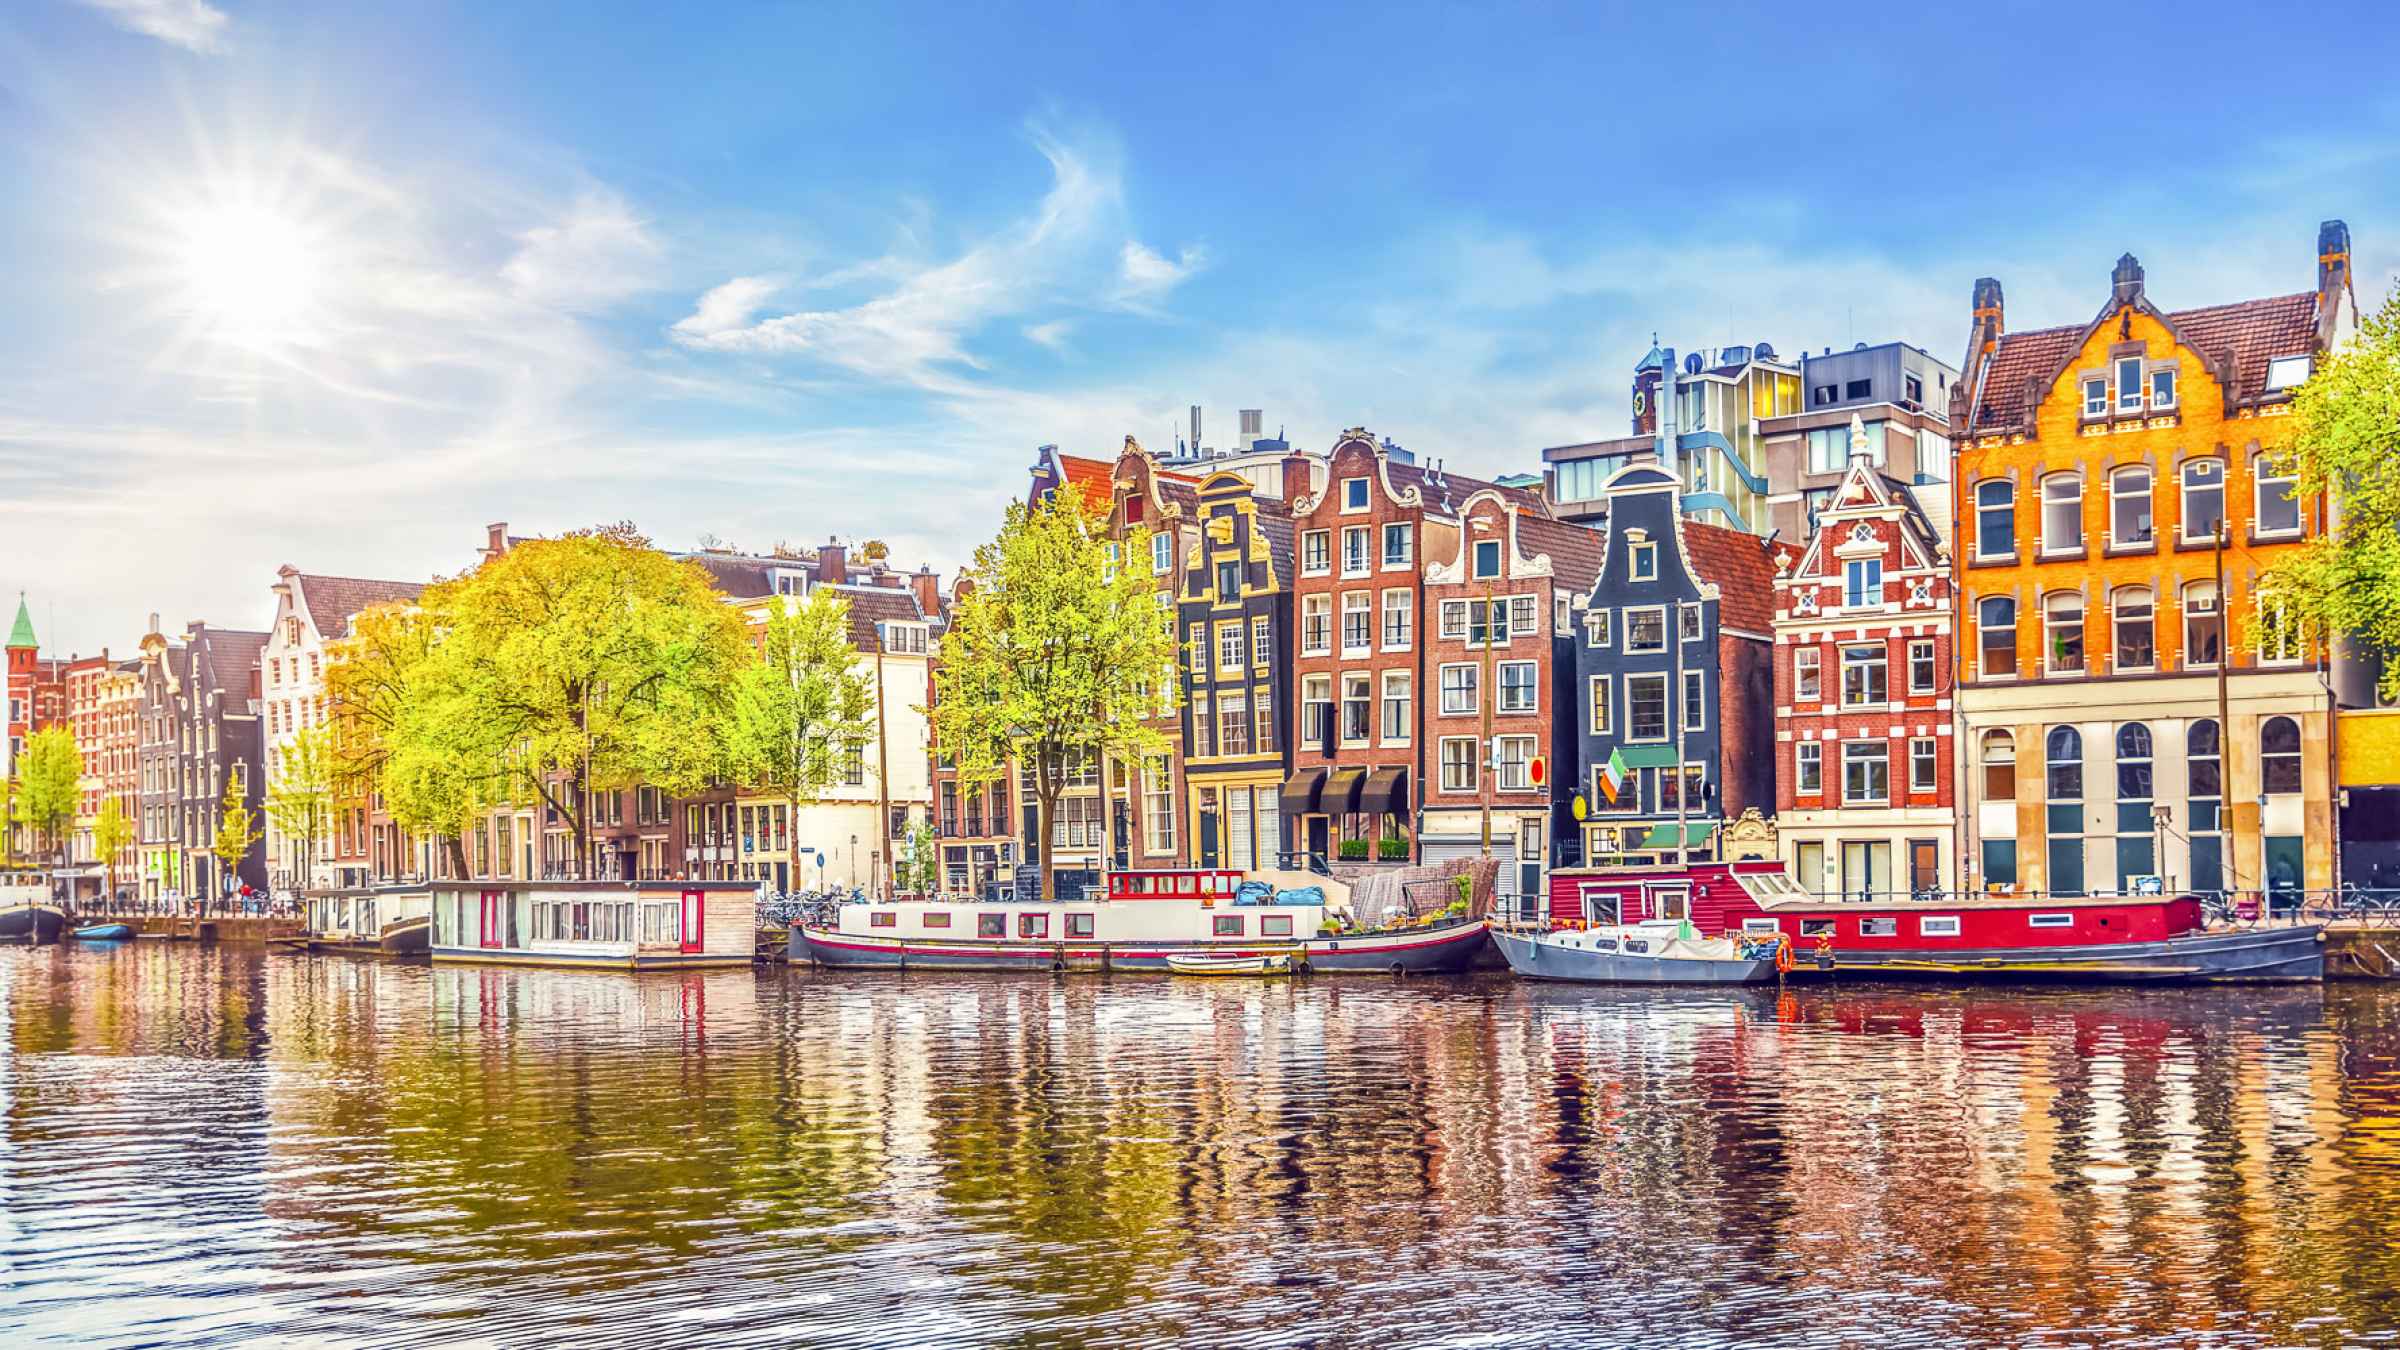 Come and meet Skores this month in Amsterdam!